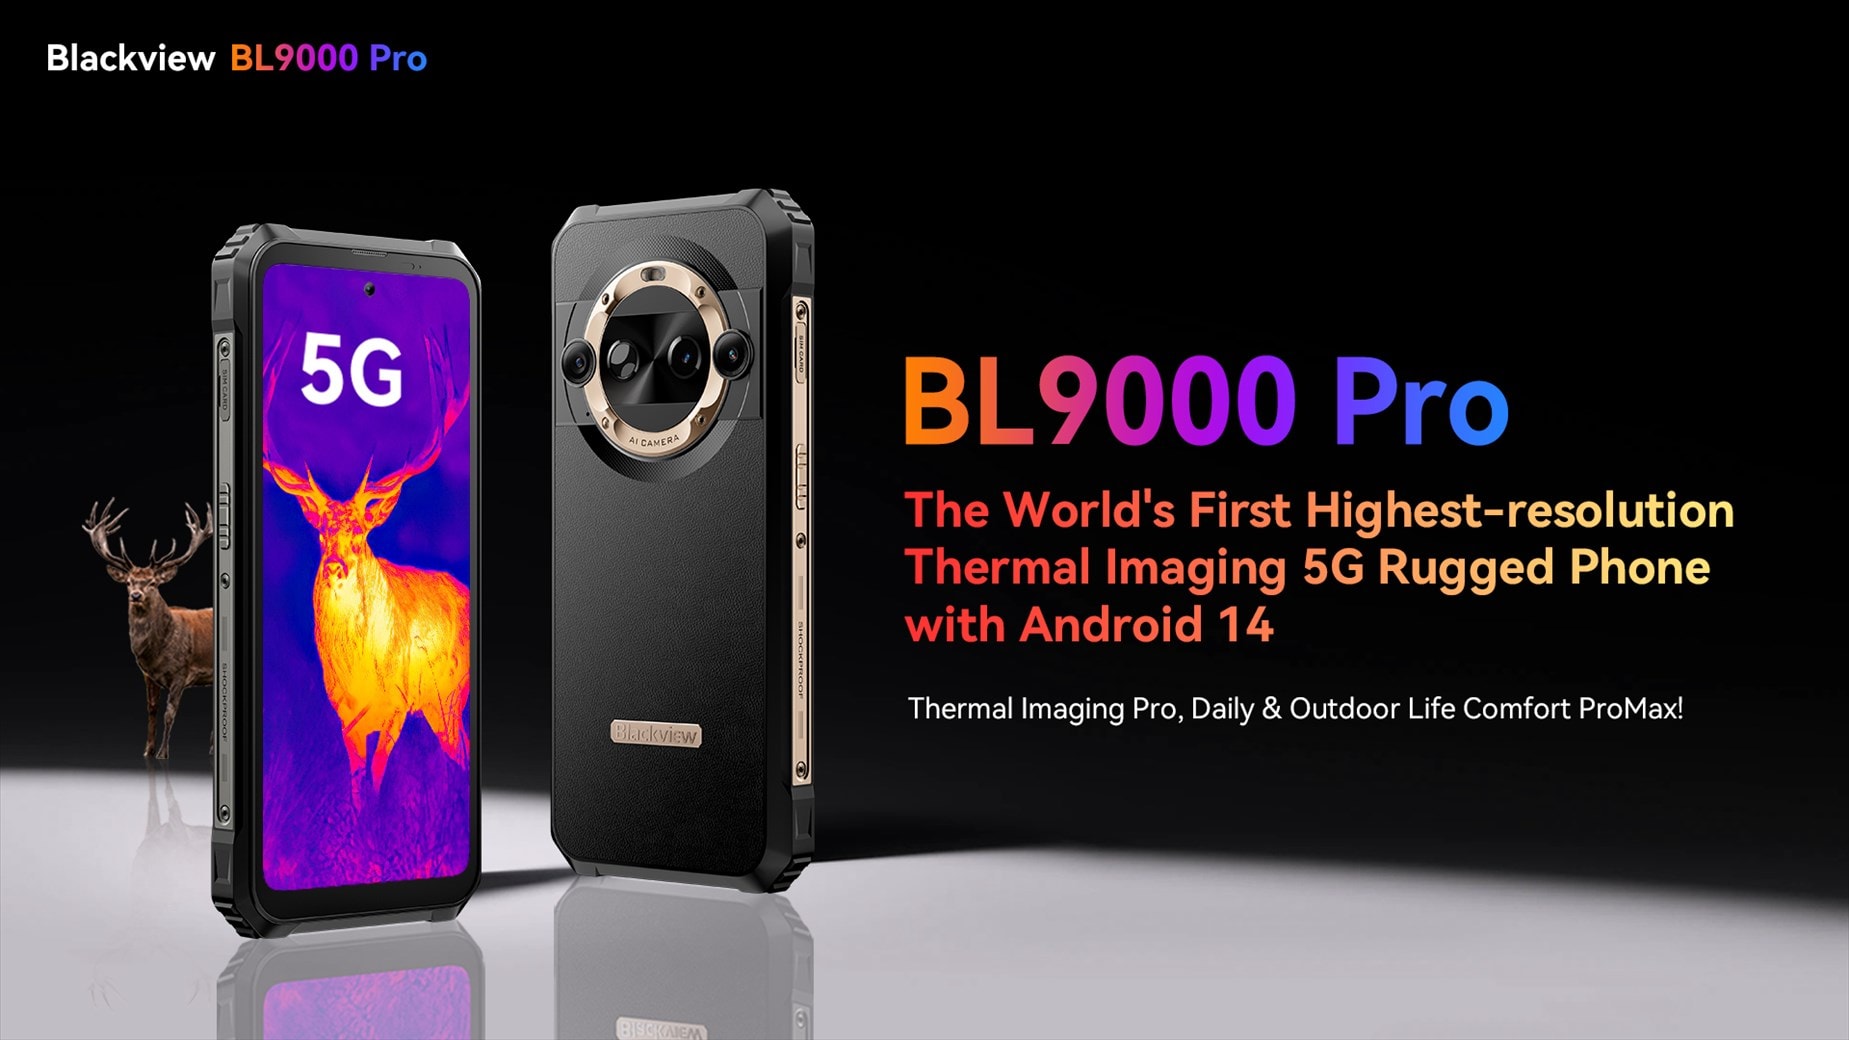 Blackview Set to Unveil BL9000 Pro: The World’s First Highest-Resolution FLIR® Thermal Imaging 5G Rugged Phone Running on Android 14 